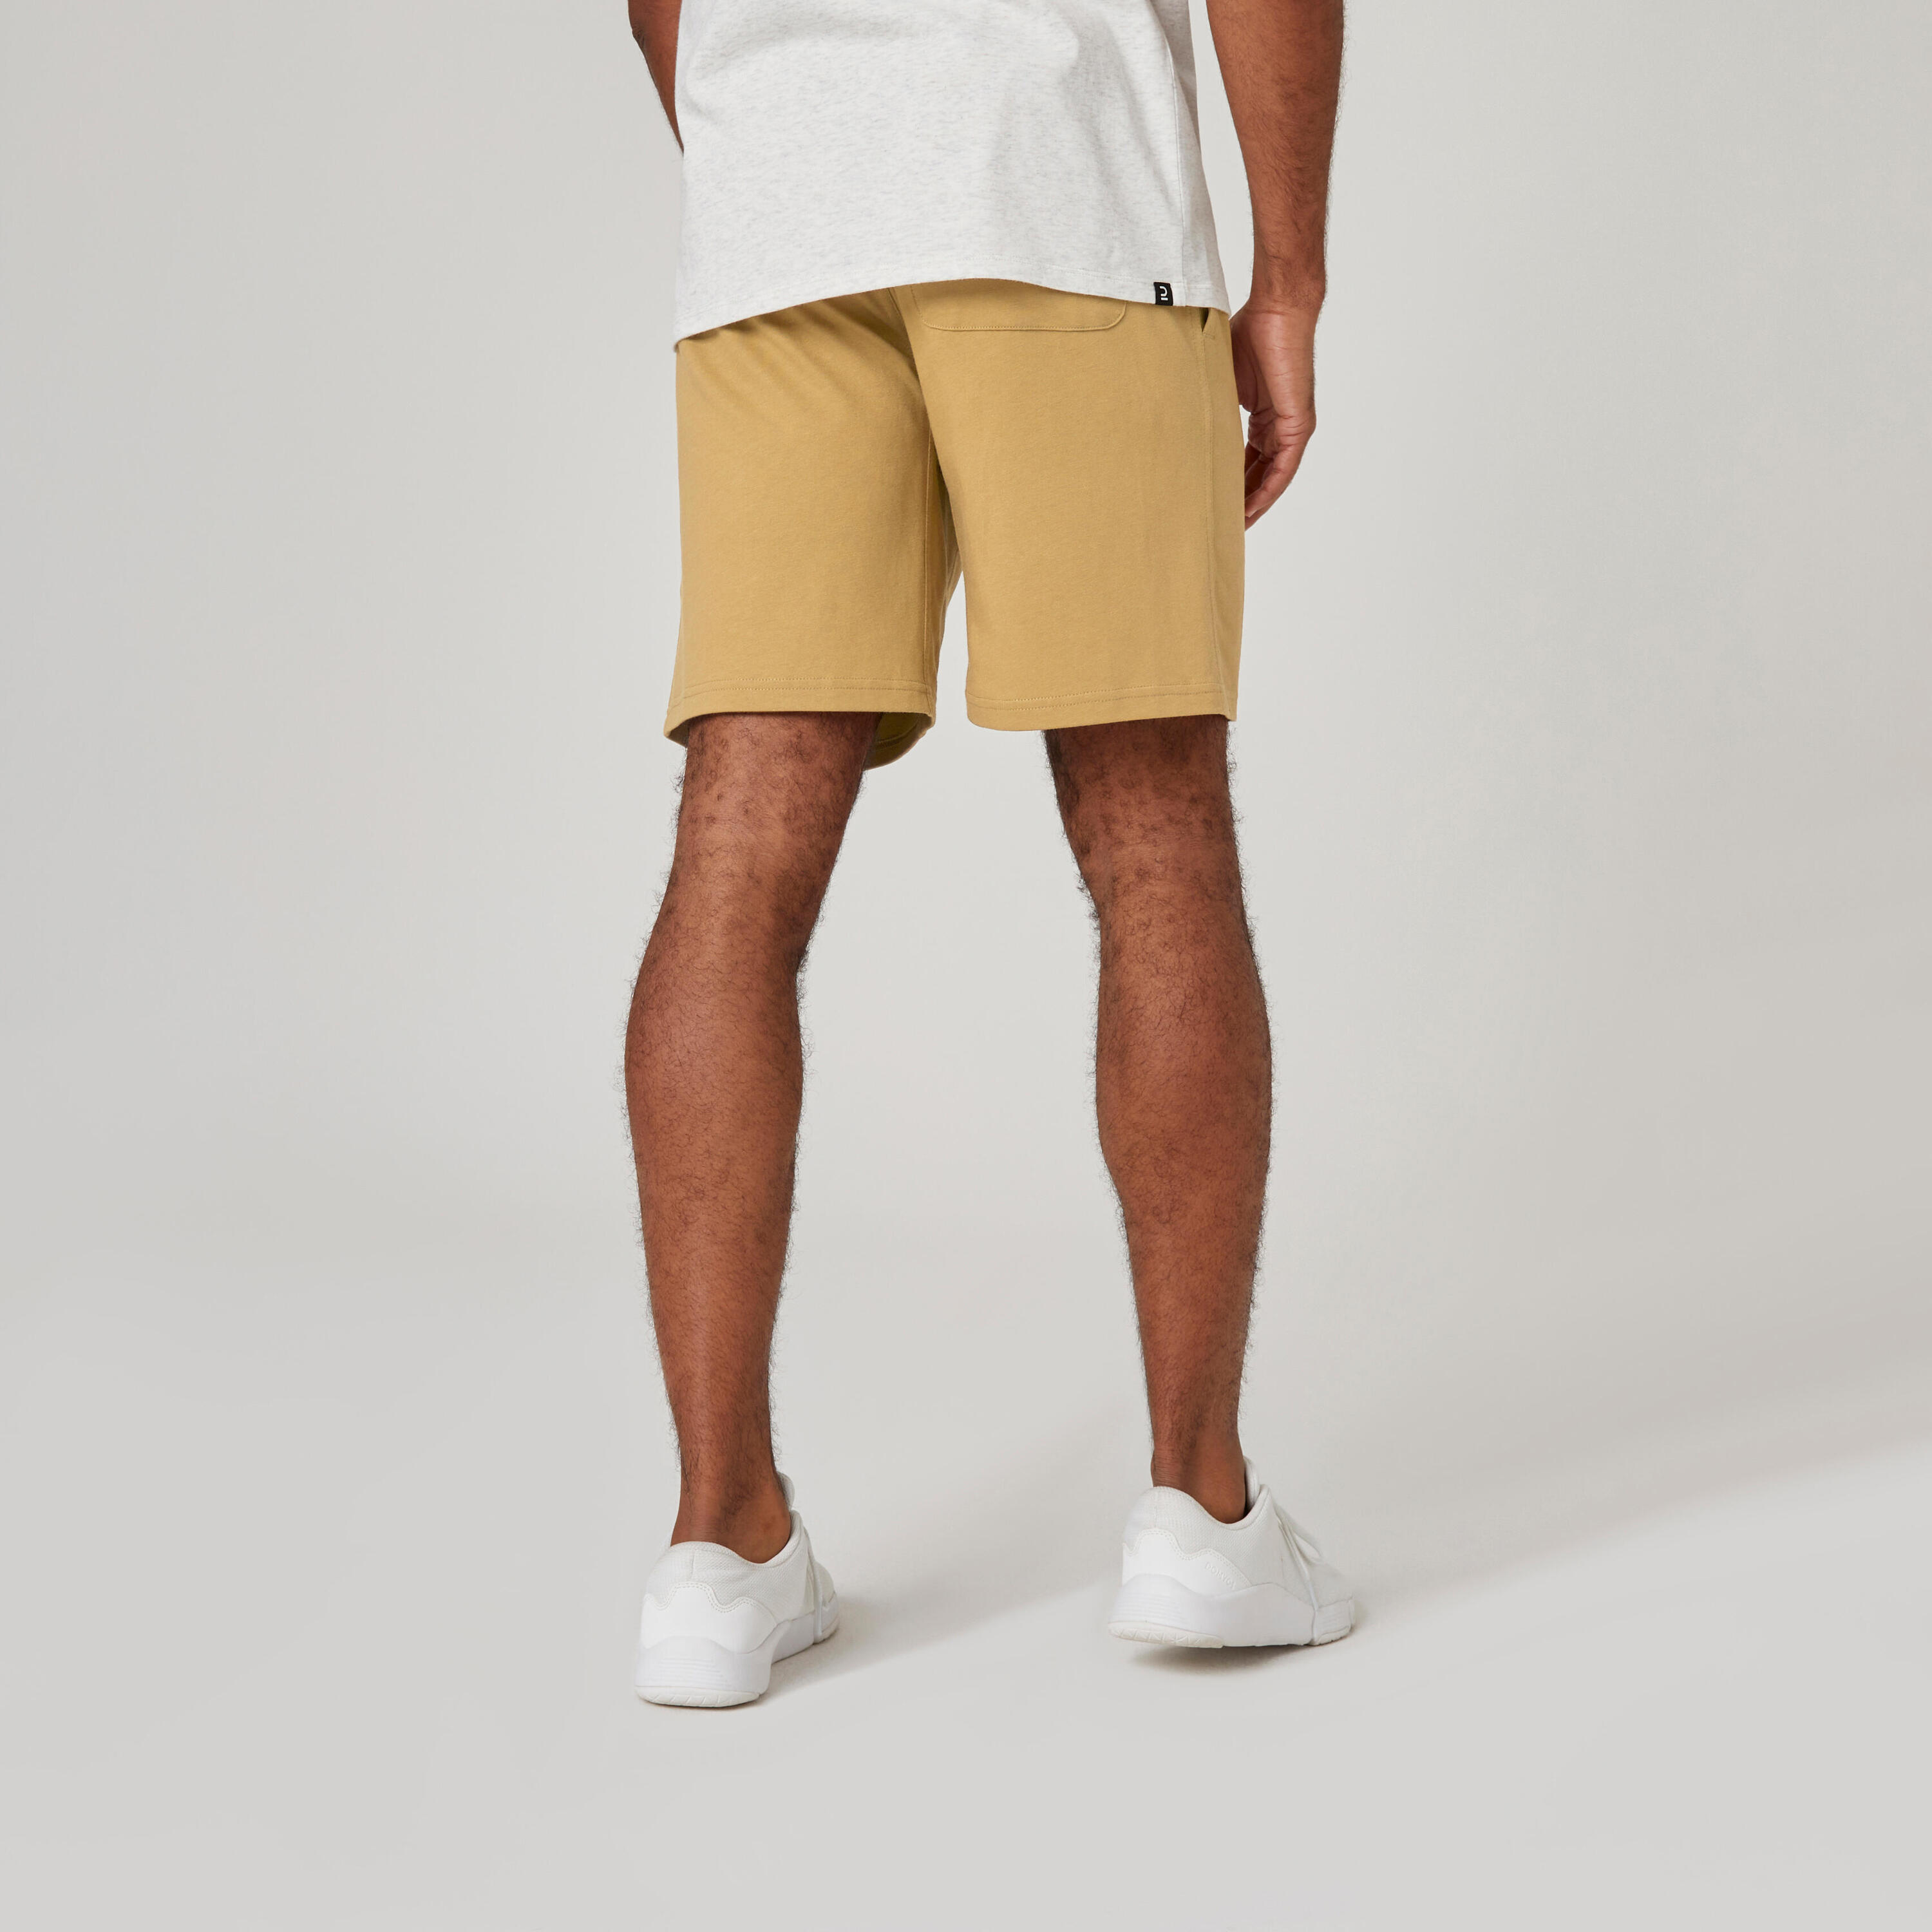 Men's Straight-Cut Cotton Fitness Shorts with Pocket - Beige 2/8